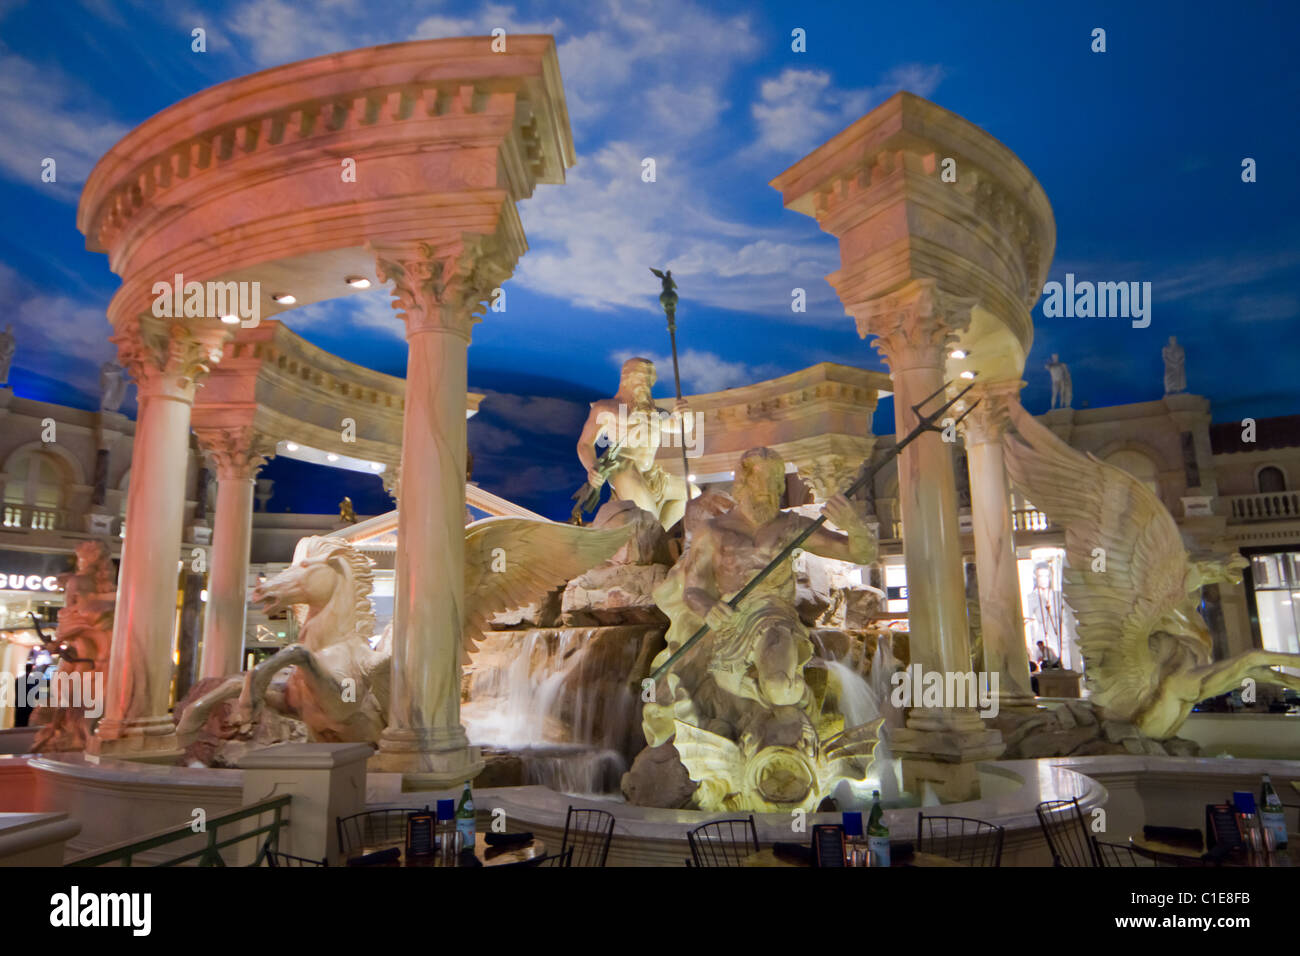 The Fountain of the Gods at the Forum Shops in Caesars Palace, Las Vegas  Strip, Nevada, United States, North America Stock Photo - Alamy